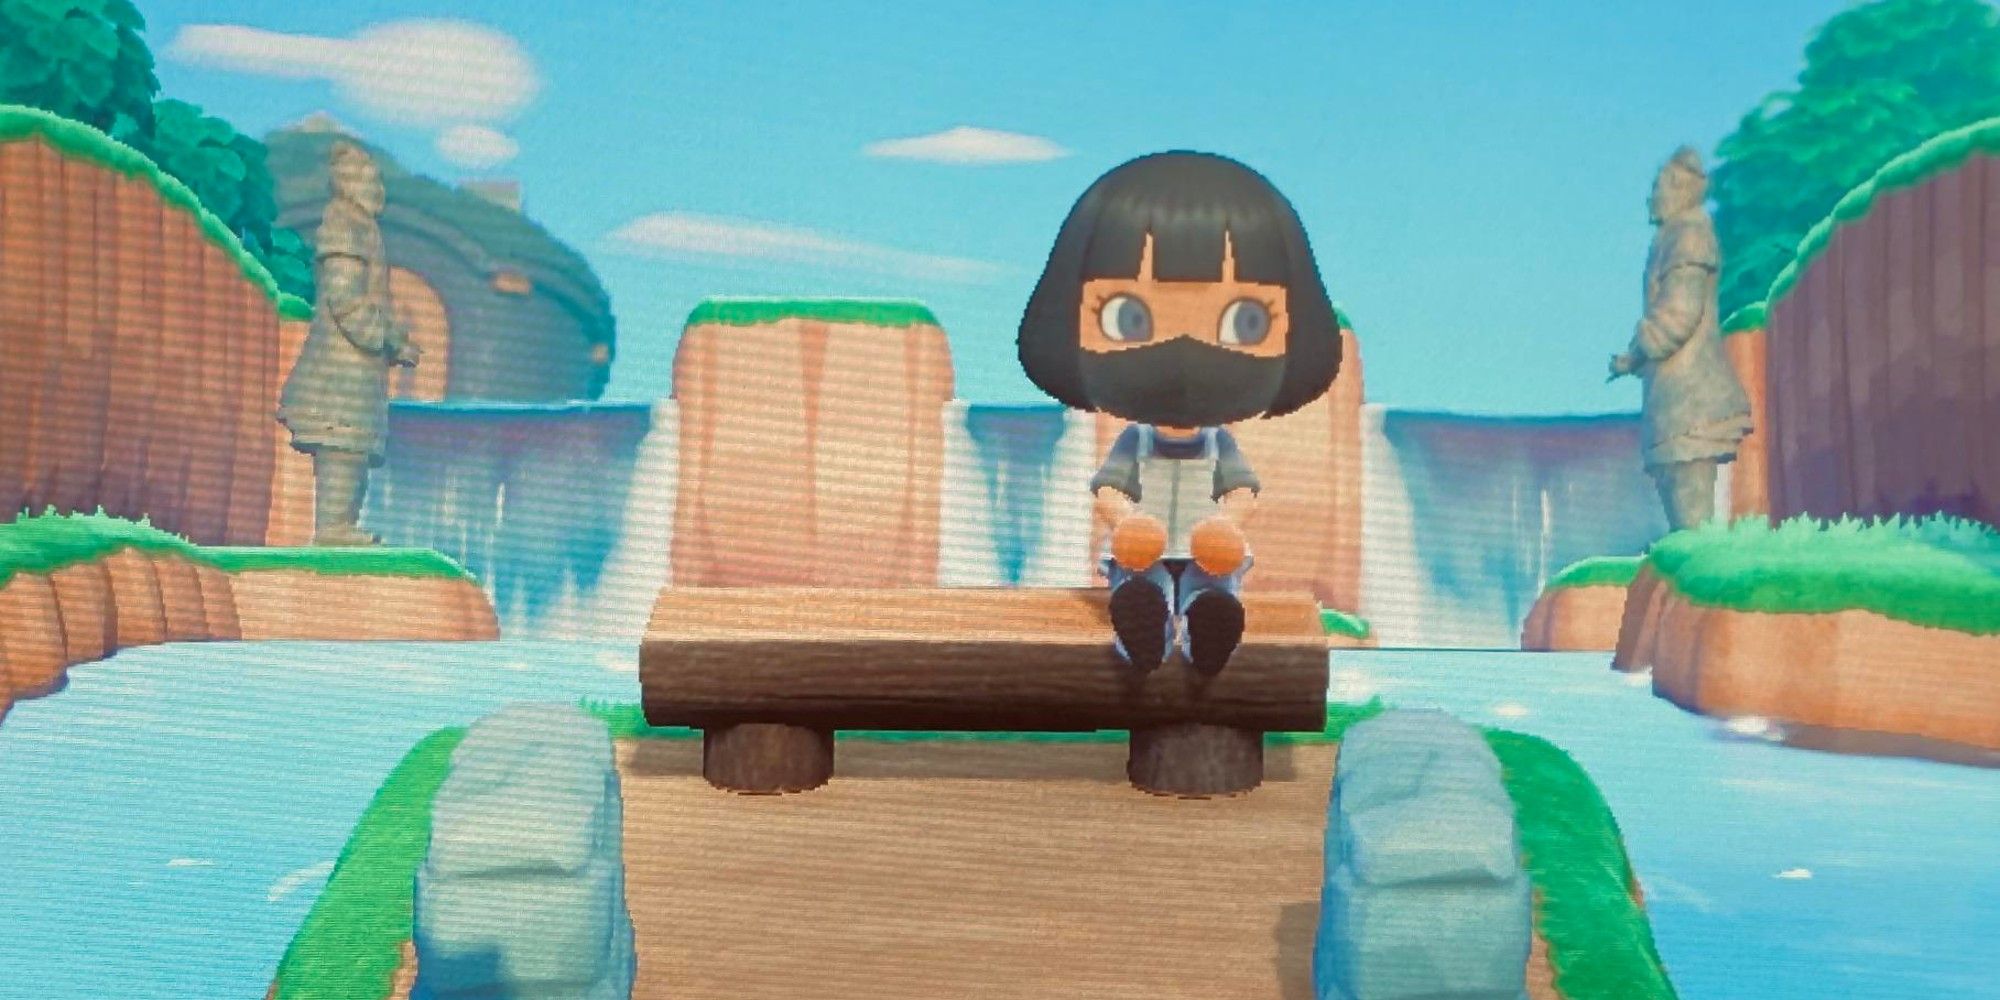 Naruto Inspired Design Ideas & Tips in Animal Crossing New Horizons